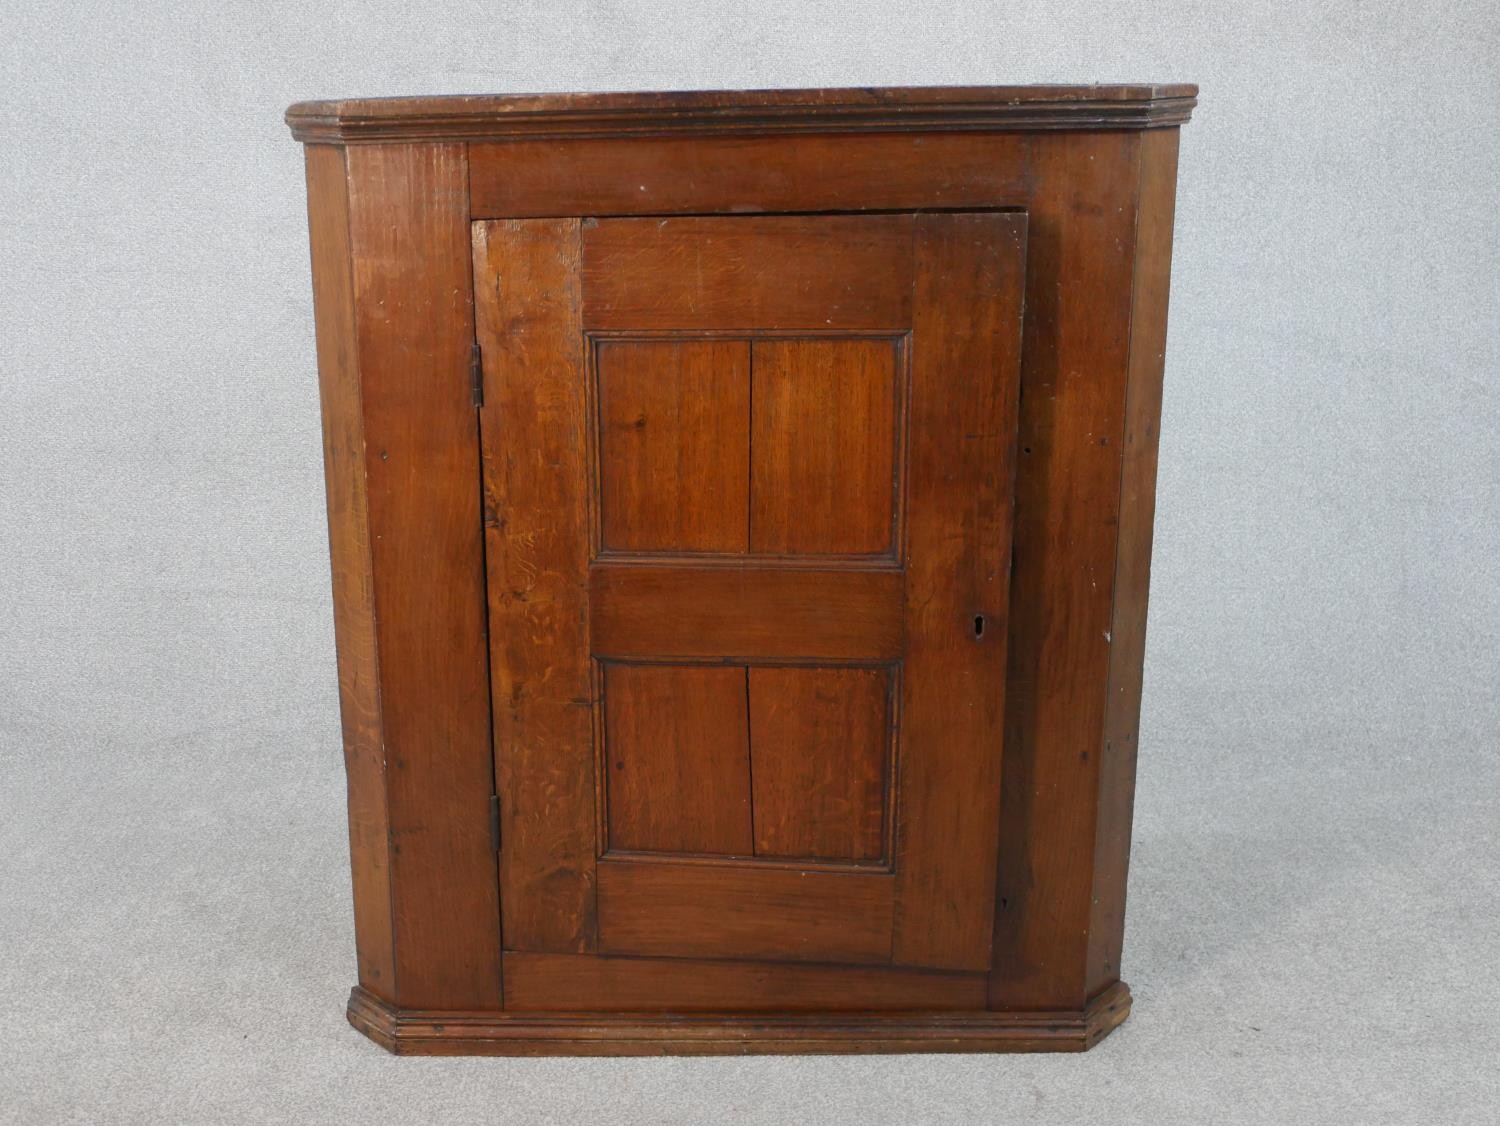 A 19th century oak hanging corner cabinet with panel door enclosing two shelves. H.106 W.94.5 W.46cm